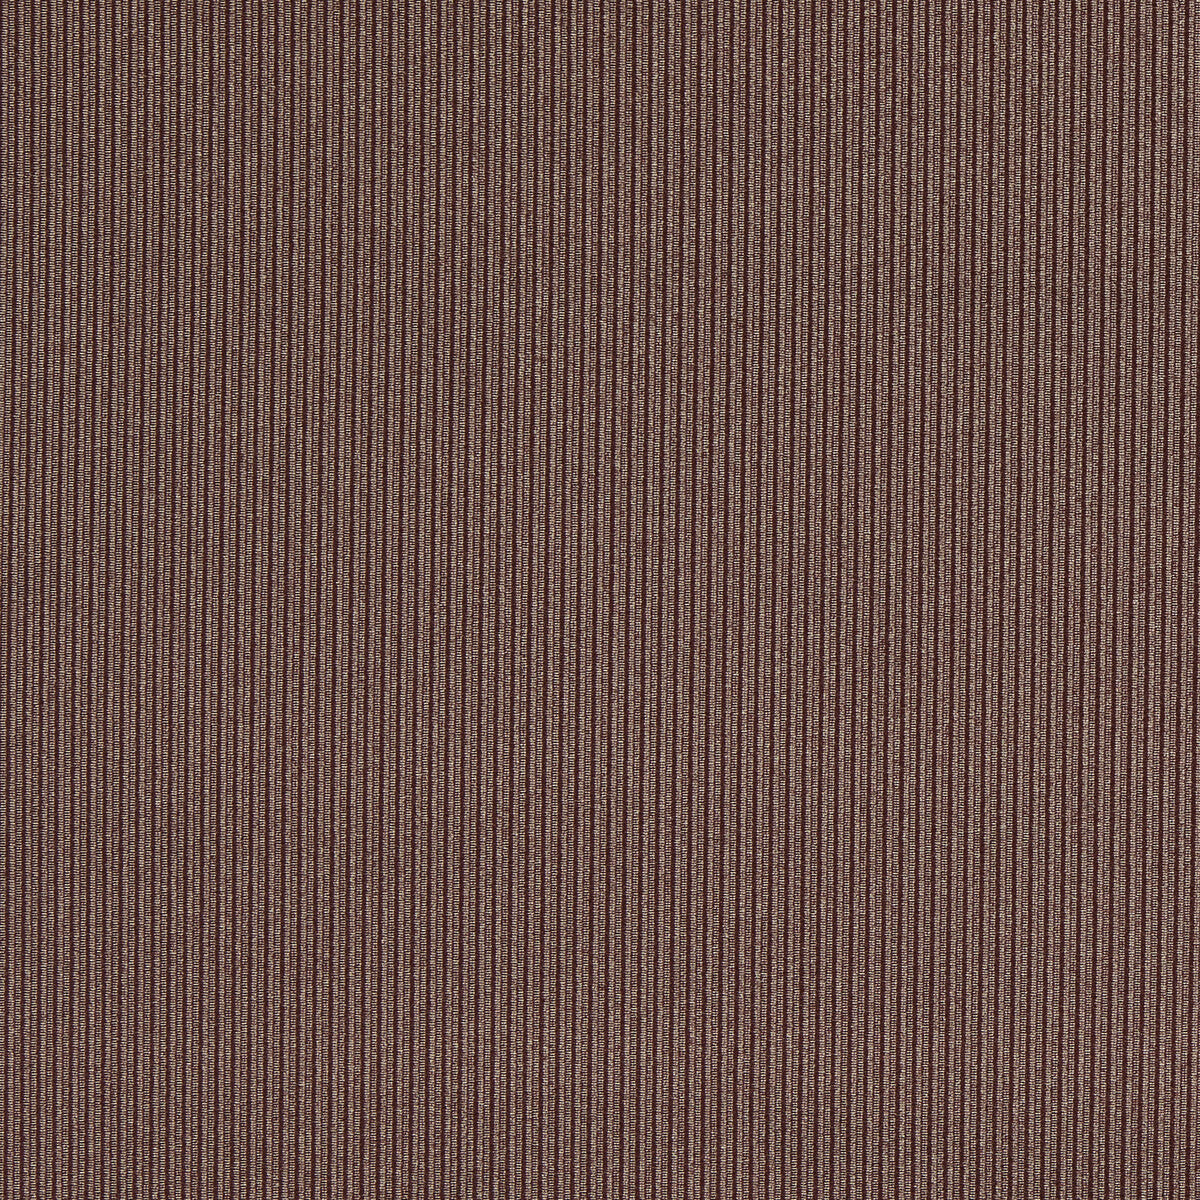 Ashdown fabric in mulberry color - pattern F1688/06.CAC.0 - by Clarke And Clarke in the Whitworth collection